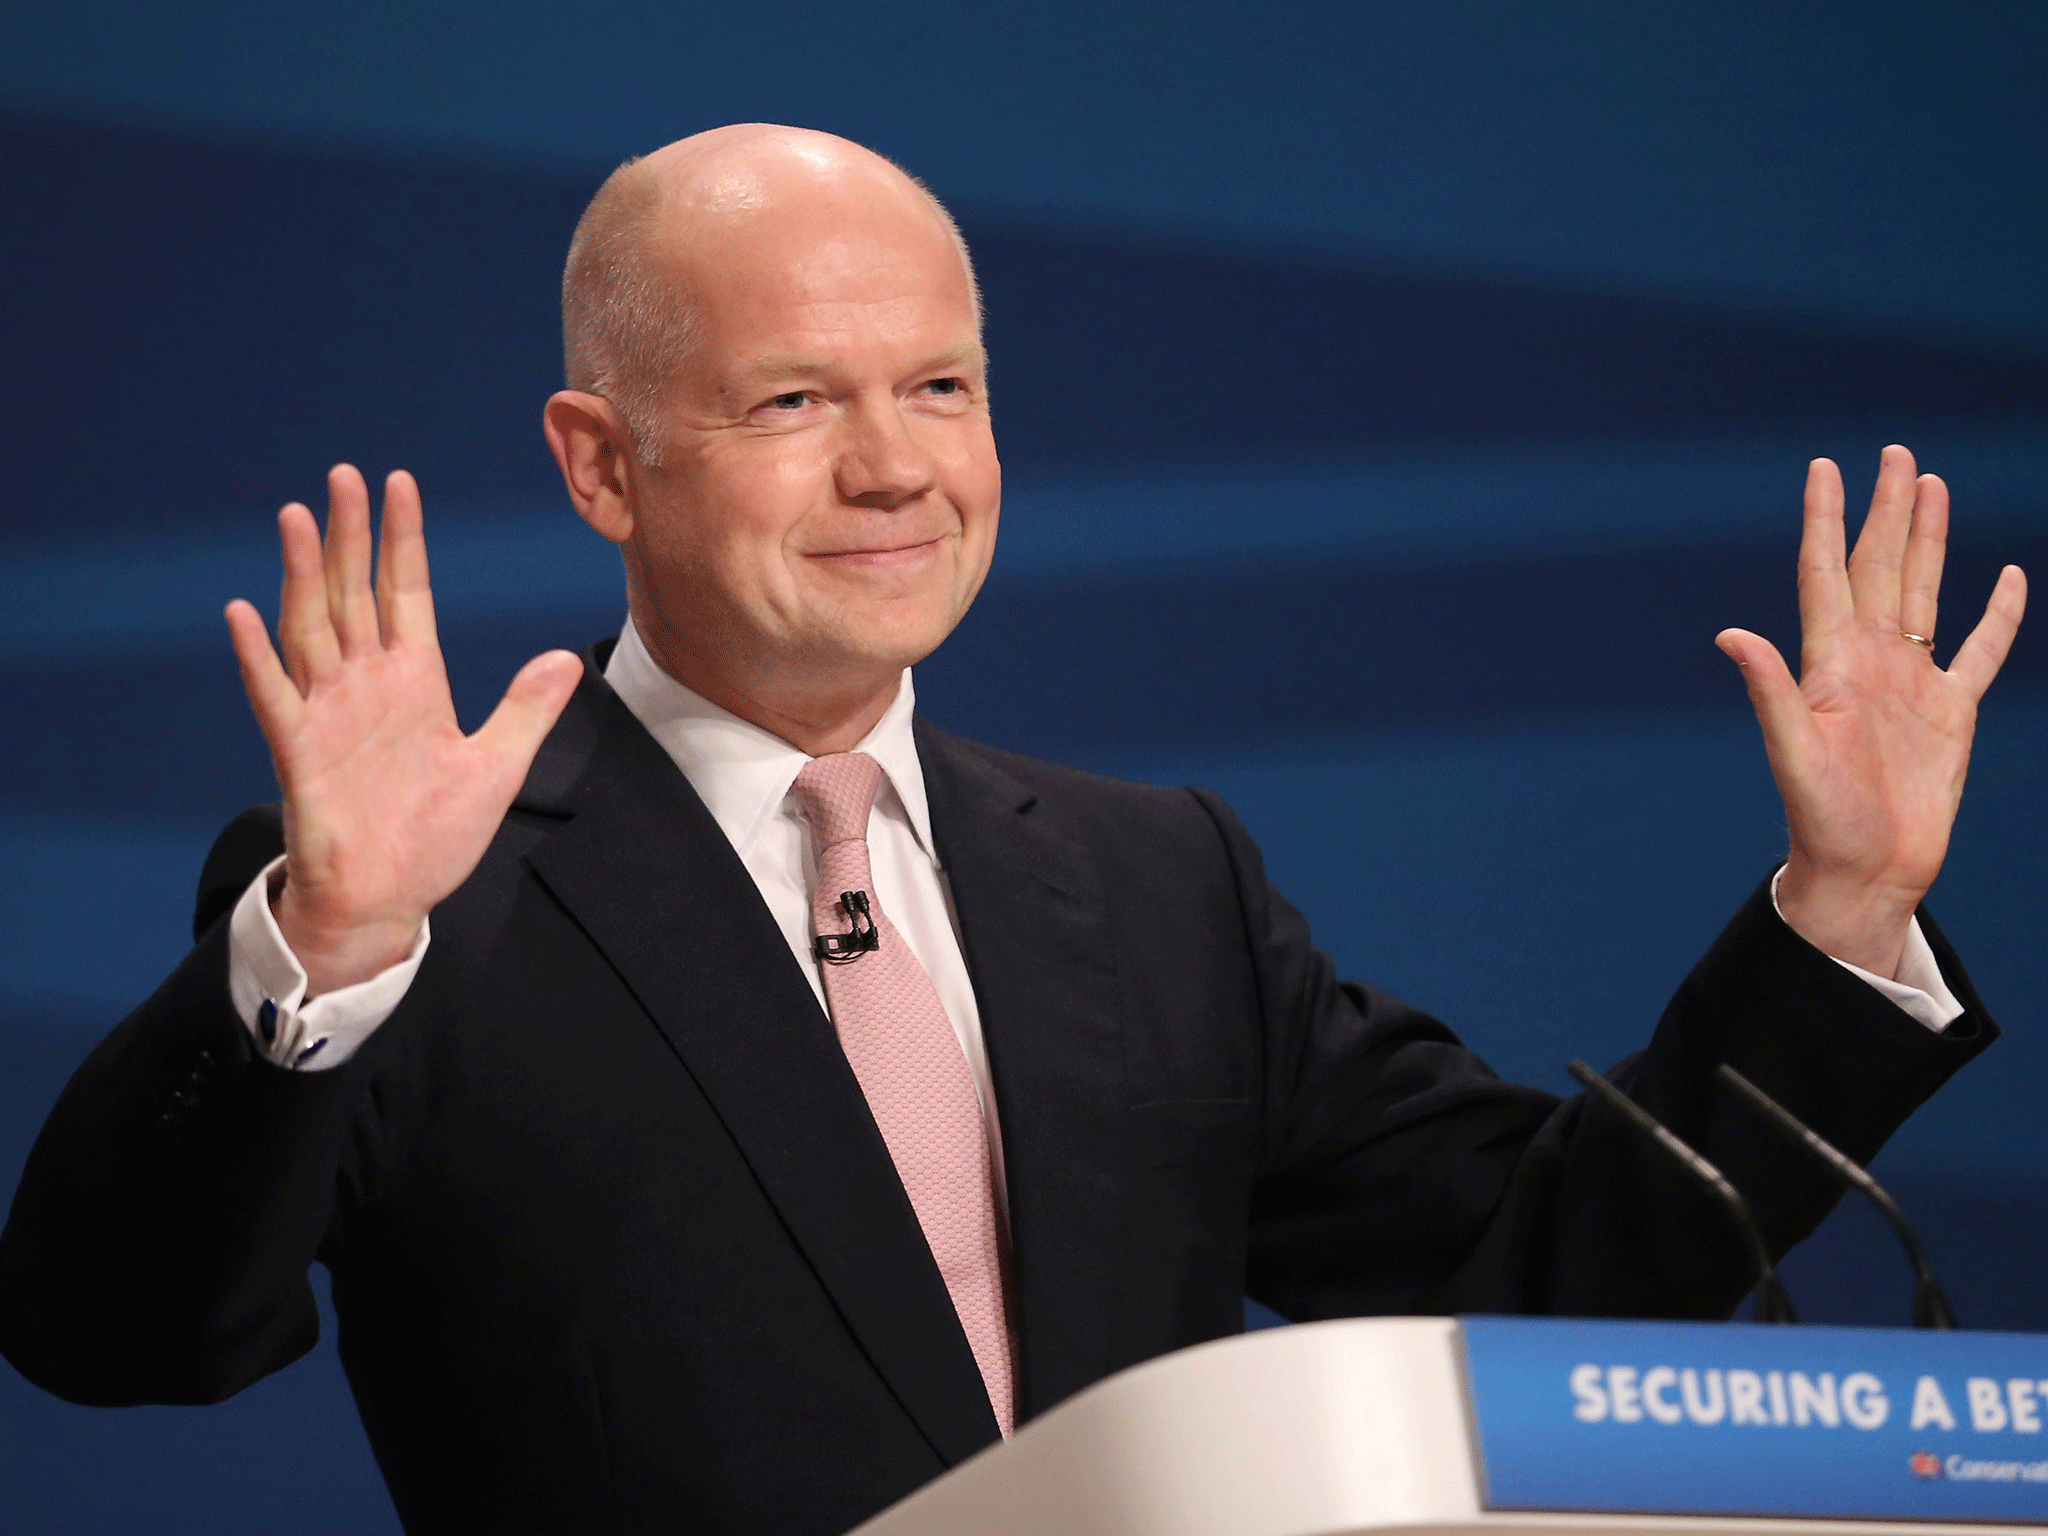 William Hague, addresses delegates at the Conservative party conference for the last time in his political career in Birmingham